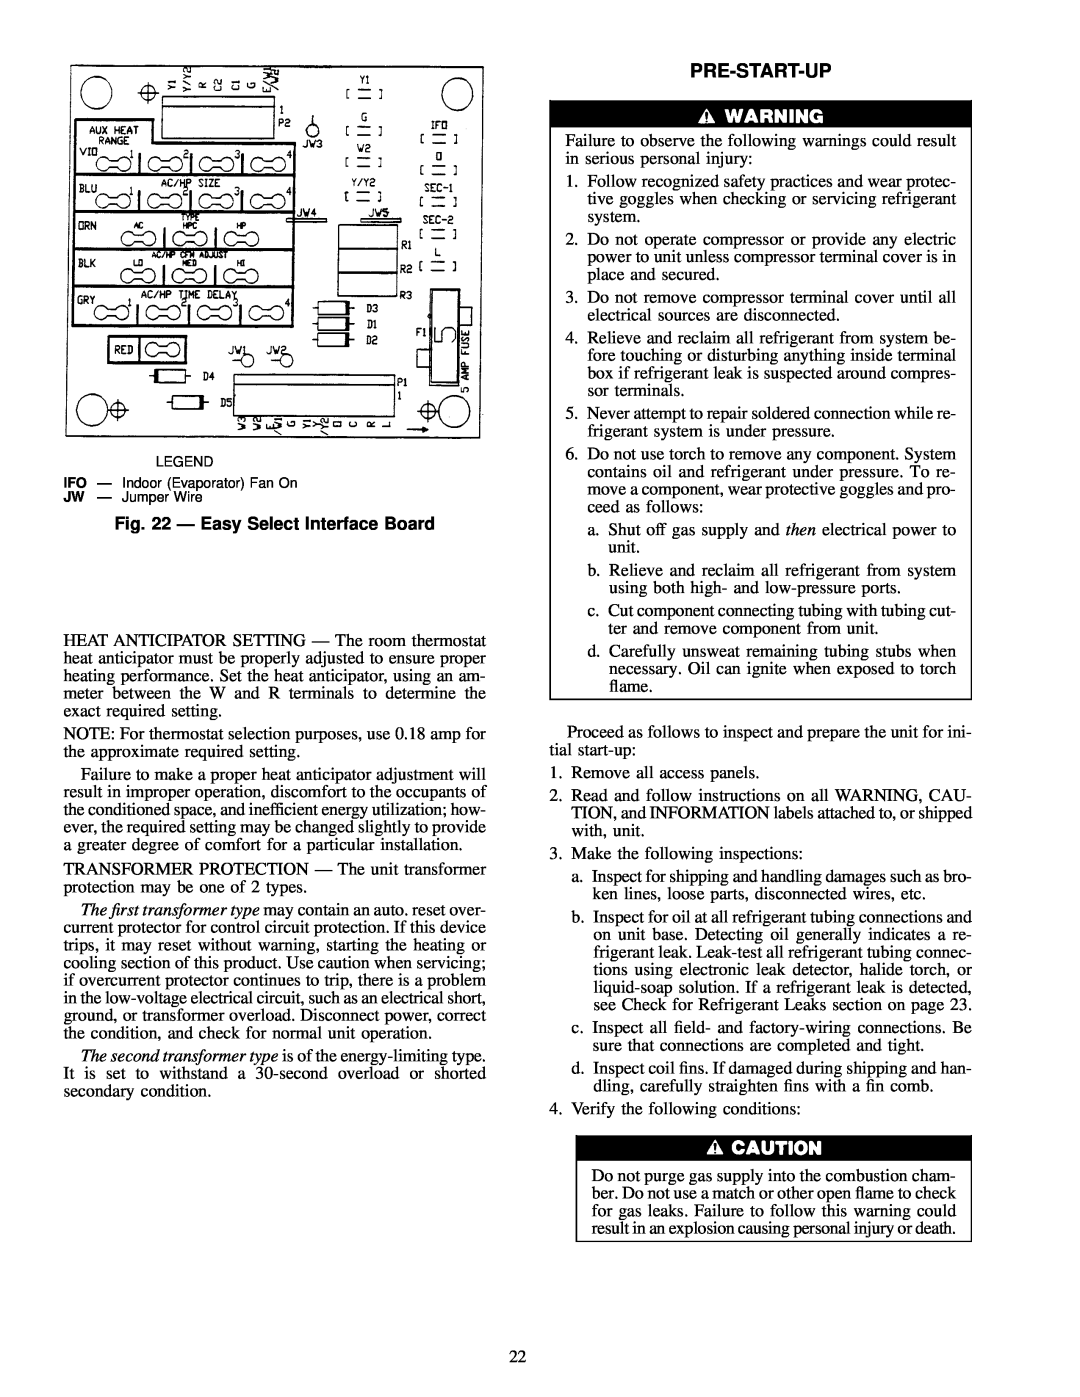 Carrier 48SS018-060, 48SX024-060 user manual Pre-Start-Up, Ð Easy Select Interface Board 